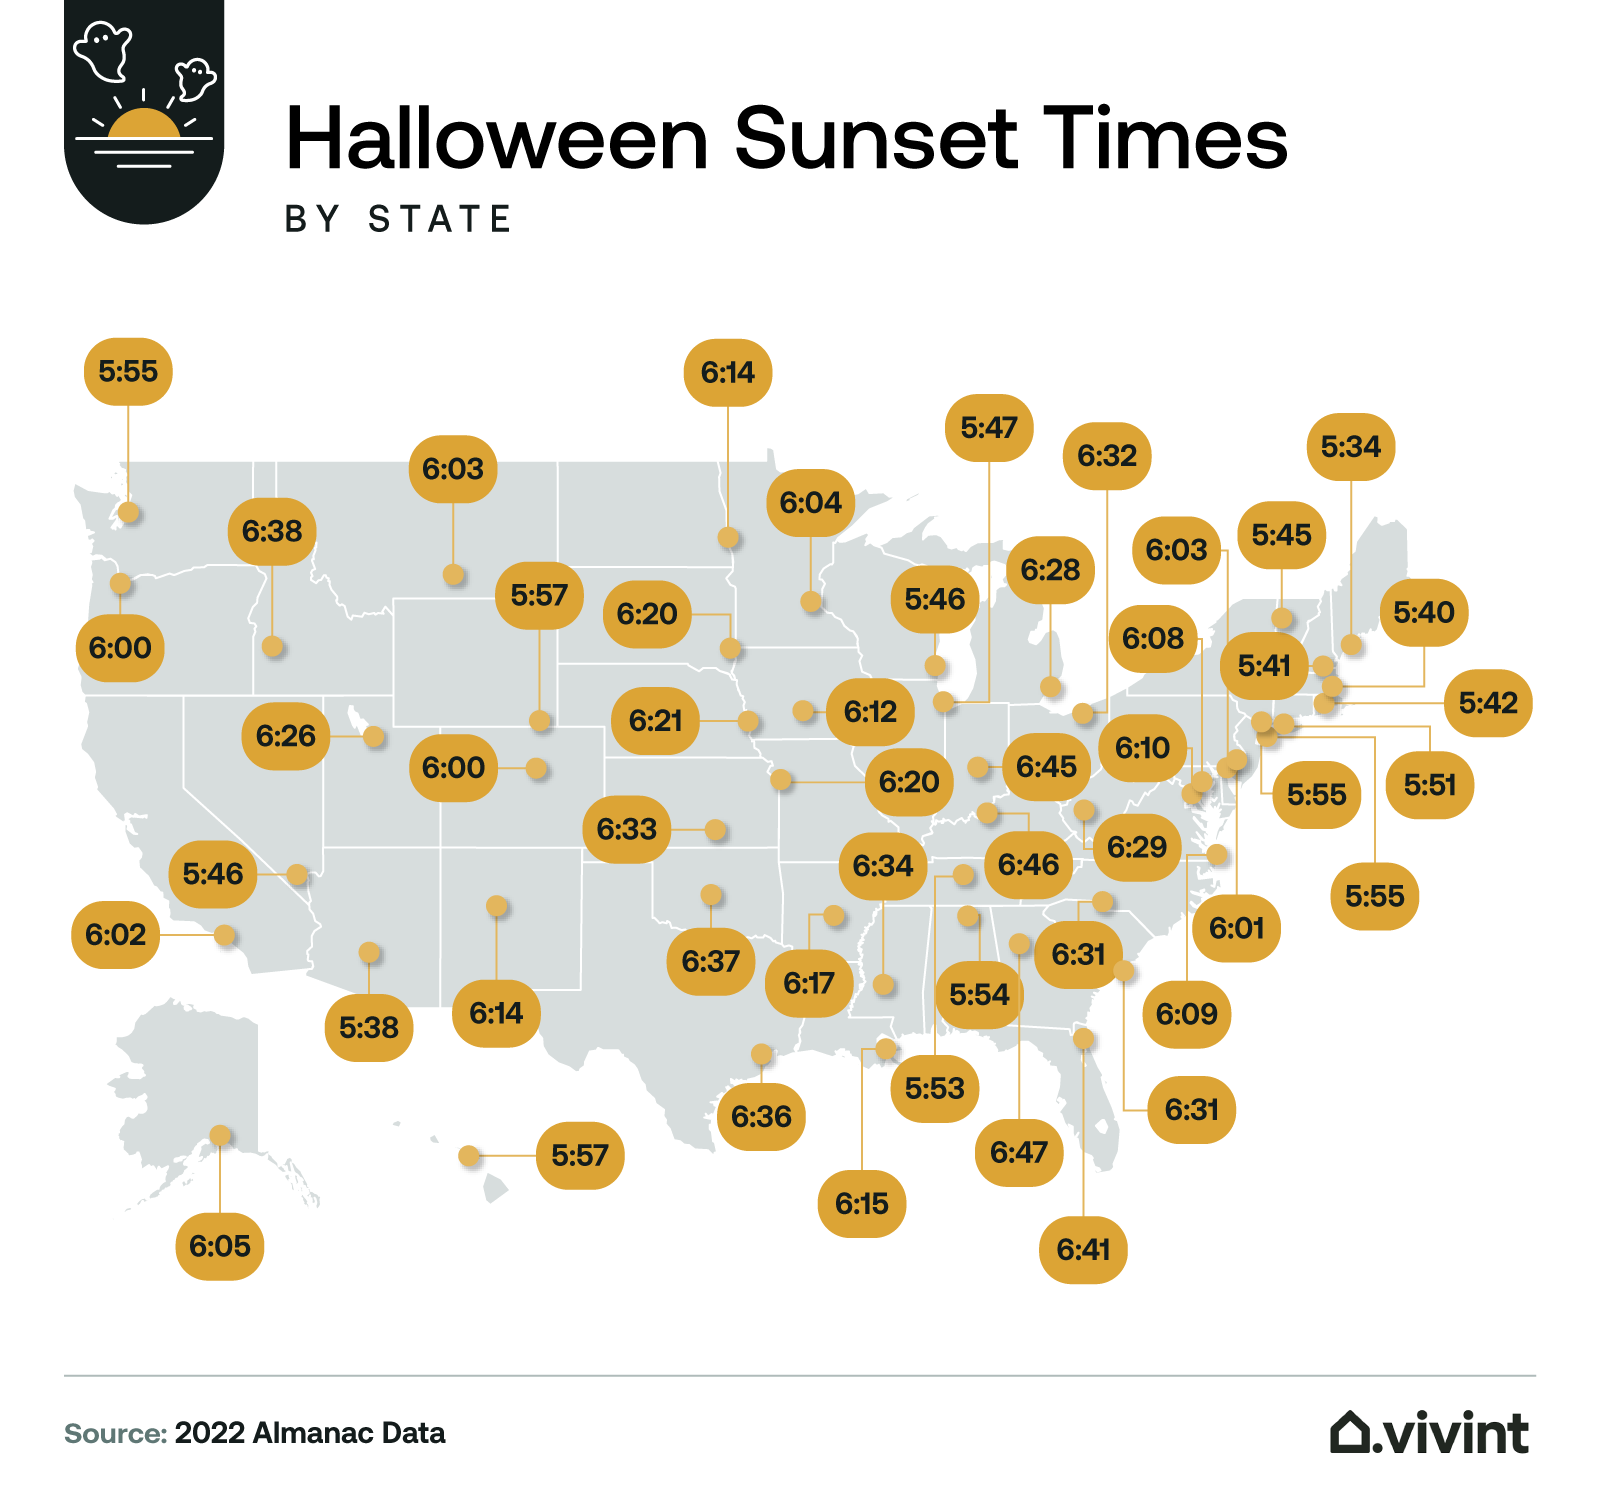 Information about when the sun sets in each state on Halloween 2022.